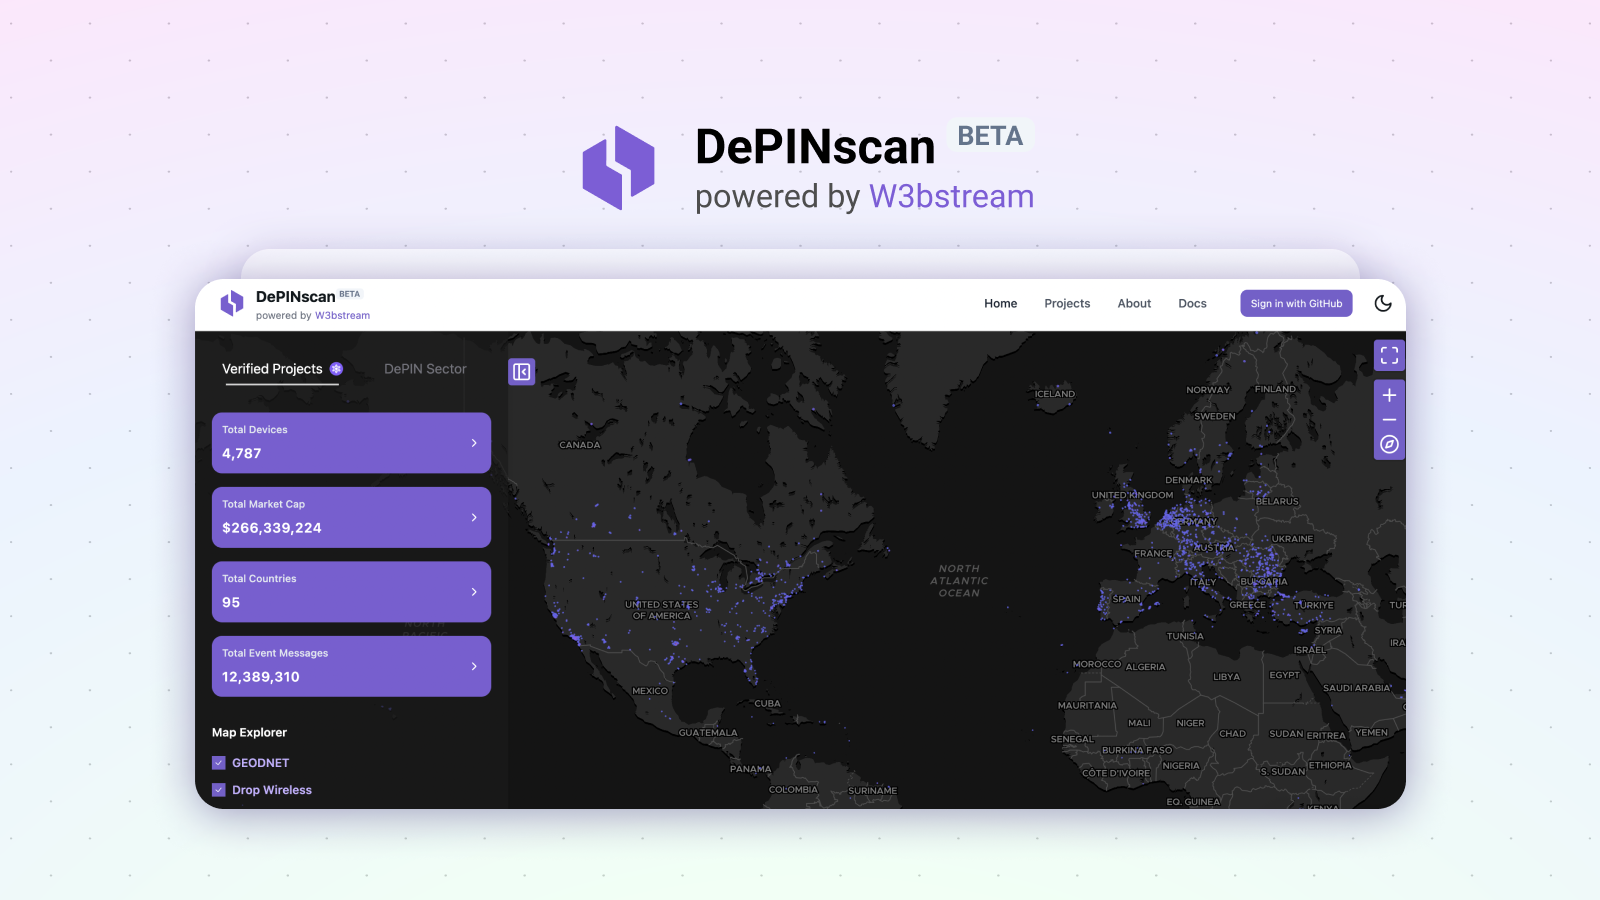 A Public Good That Brings Transparency and Composability to DePIN: DePINscan (Beta) Launch